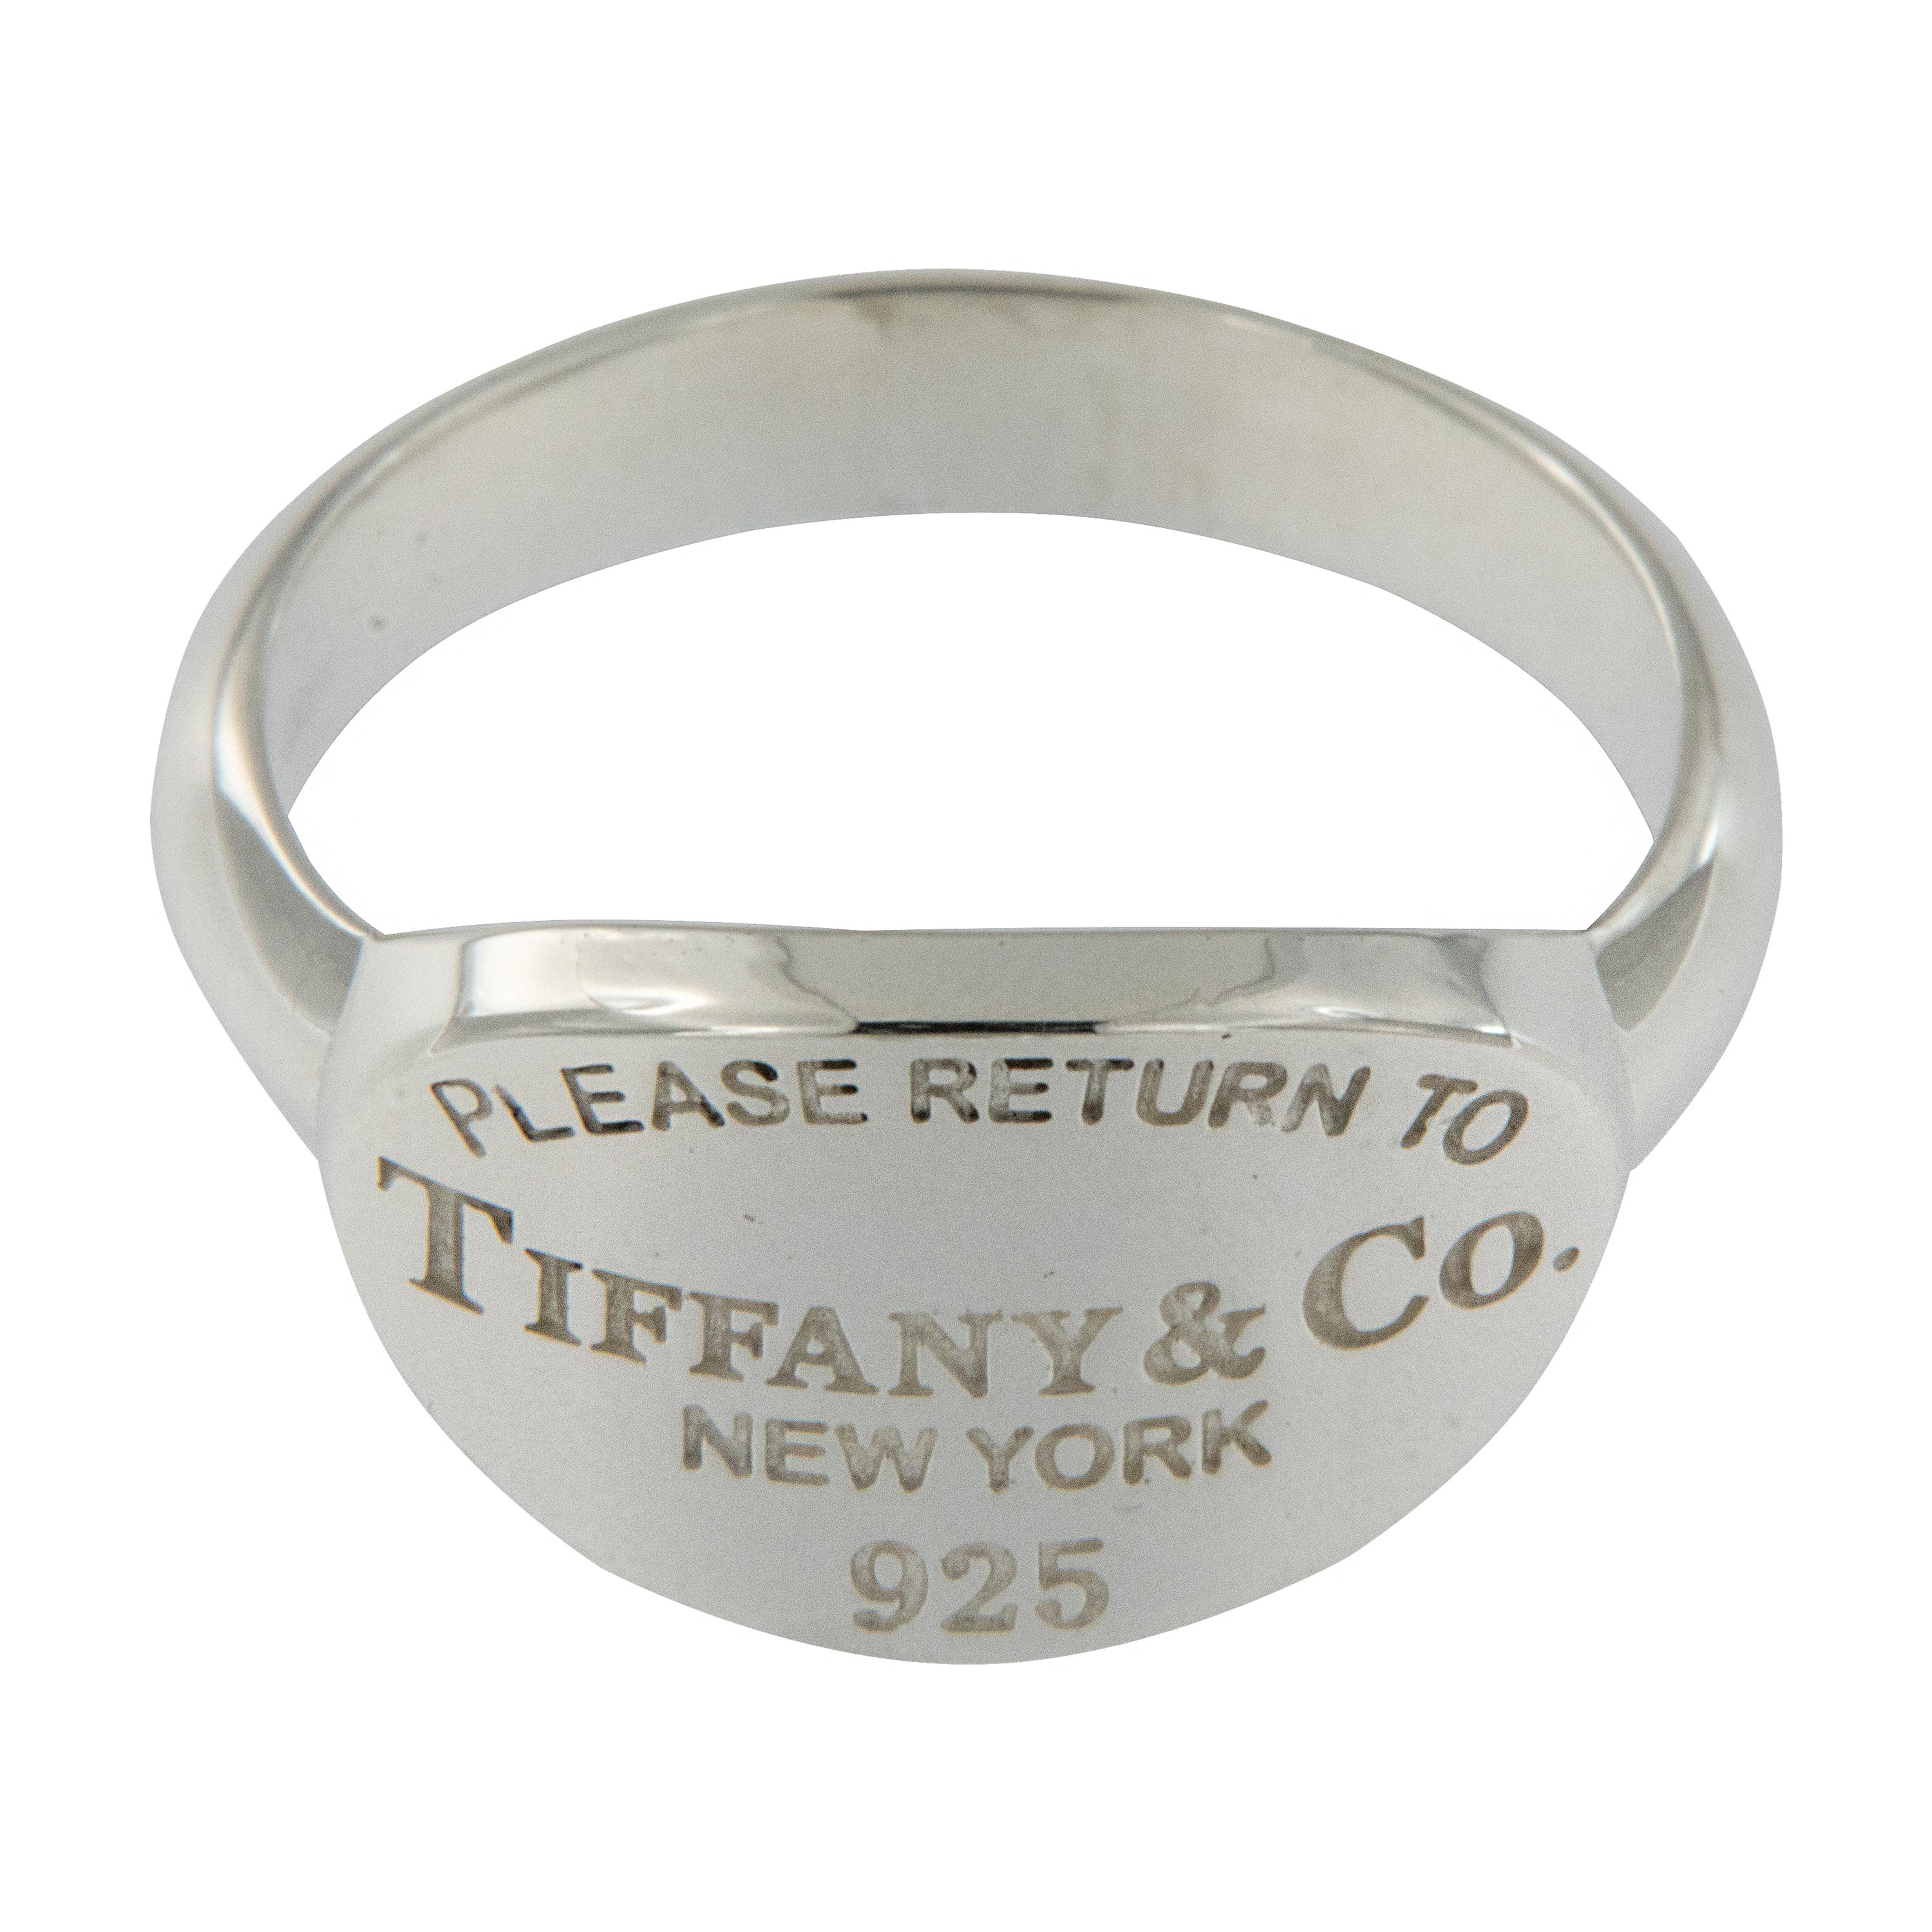 Iconic vintage Tiffany & Co. sterling silver ring from their 